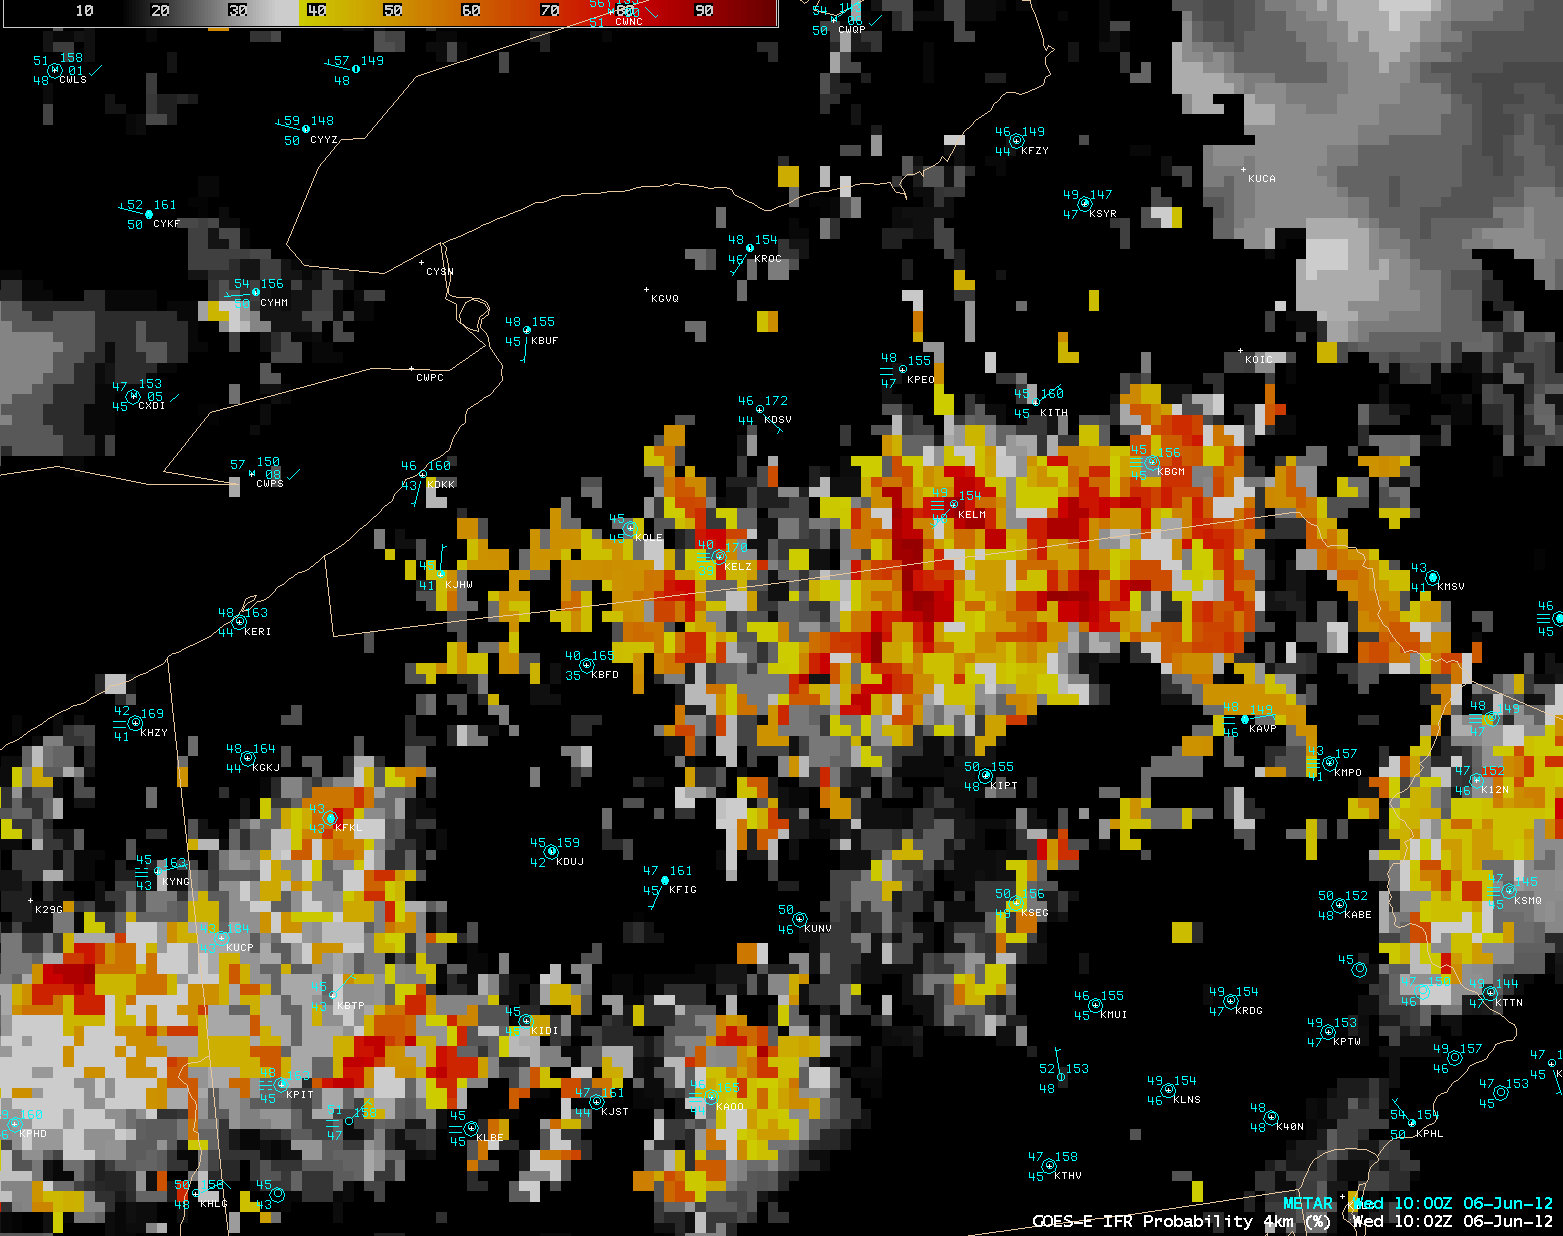 GOES-13 IFR Probability product (click image to play animation)